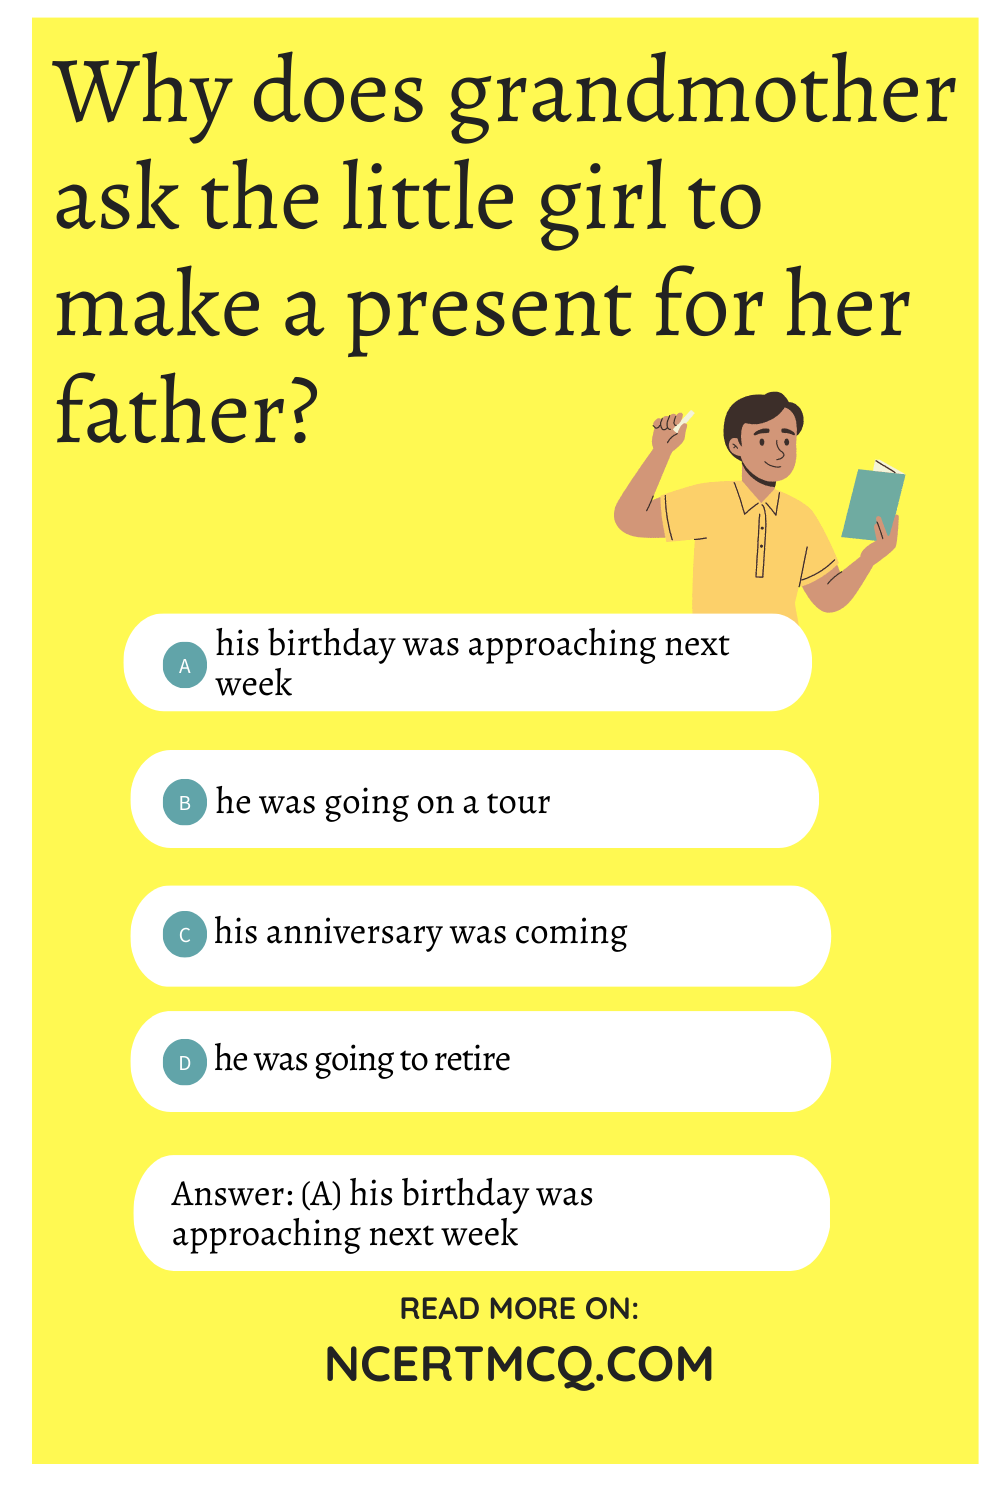 Why does grandmother ask the little girl to make a present for her father?